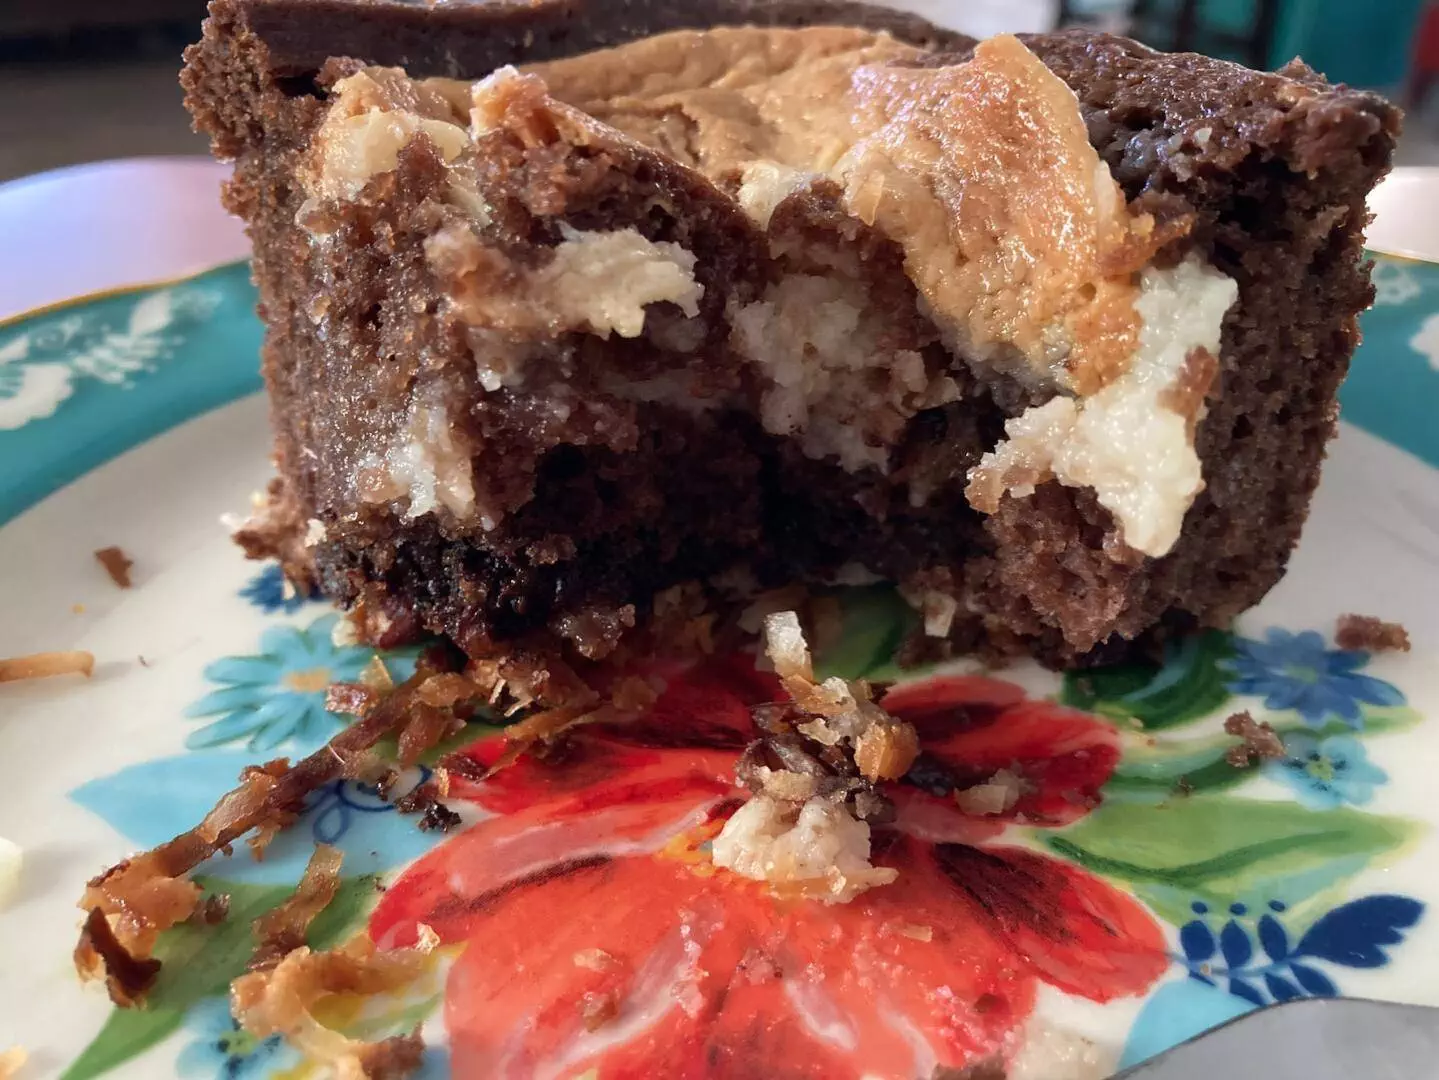 Earthquake Cake (German Chocolate Upside Down Cake) from Out of the Box Baking.com